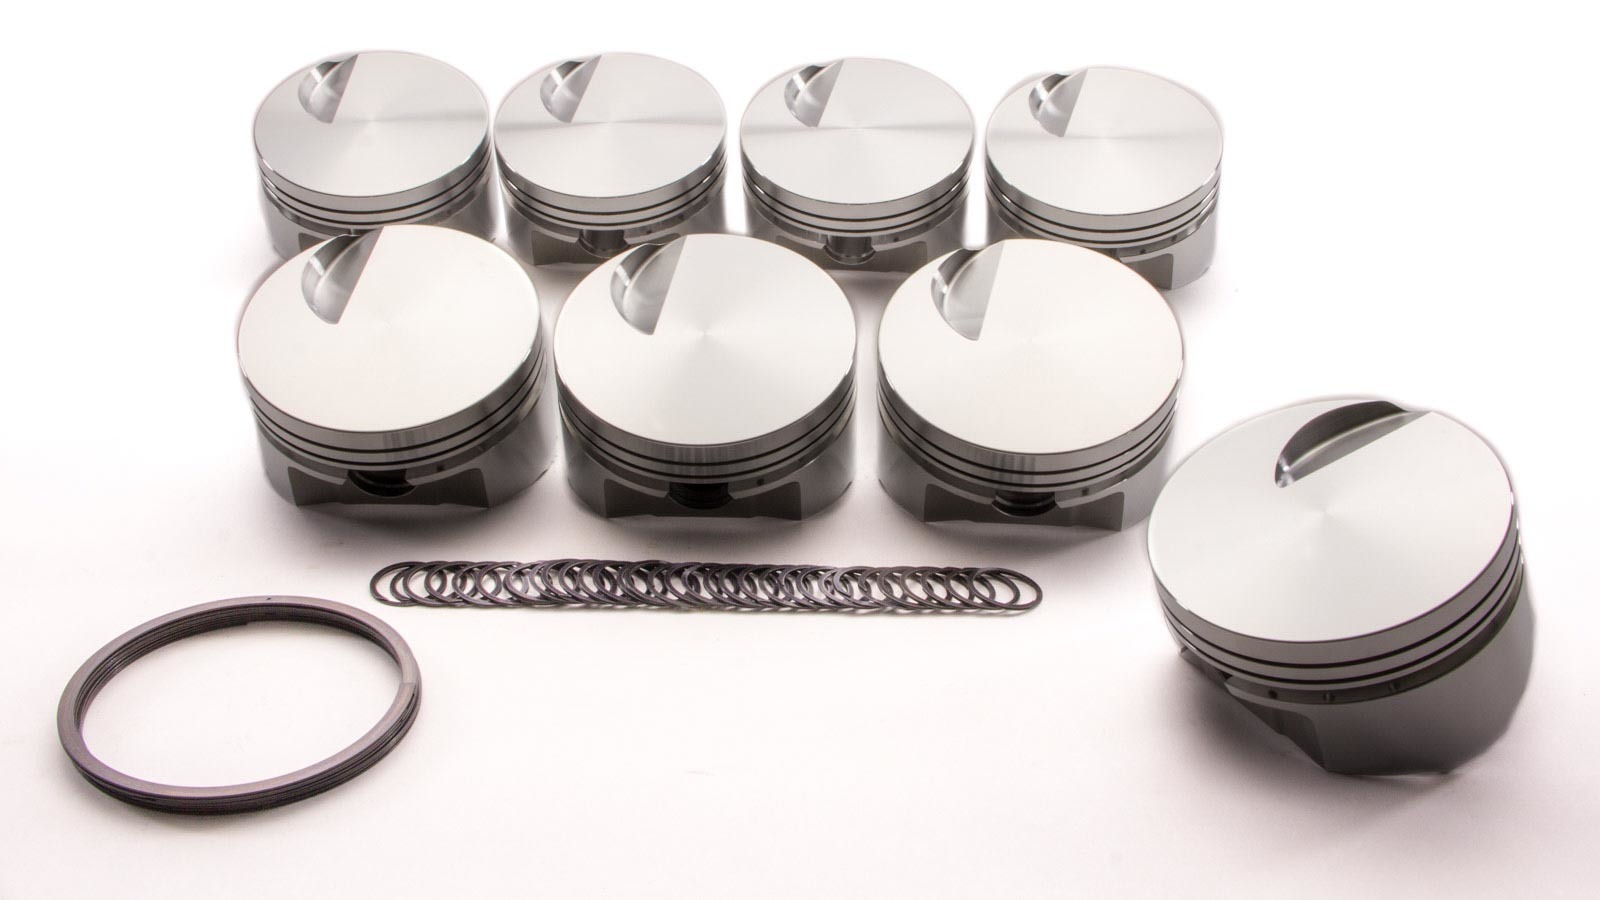 SRP Pistons 142979 Piston, Flat Top, Forged, 4.280 in Bore, 1/16 x 1/16 x 3/16 in Ring Grooves, Minus 3.00 cc, Big Block Chevy, Set of 8